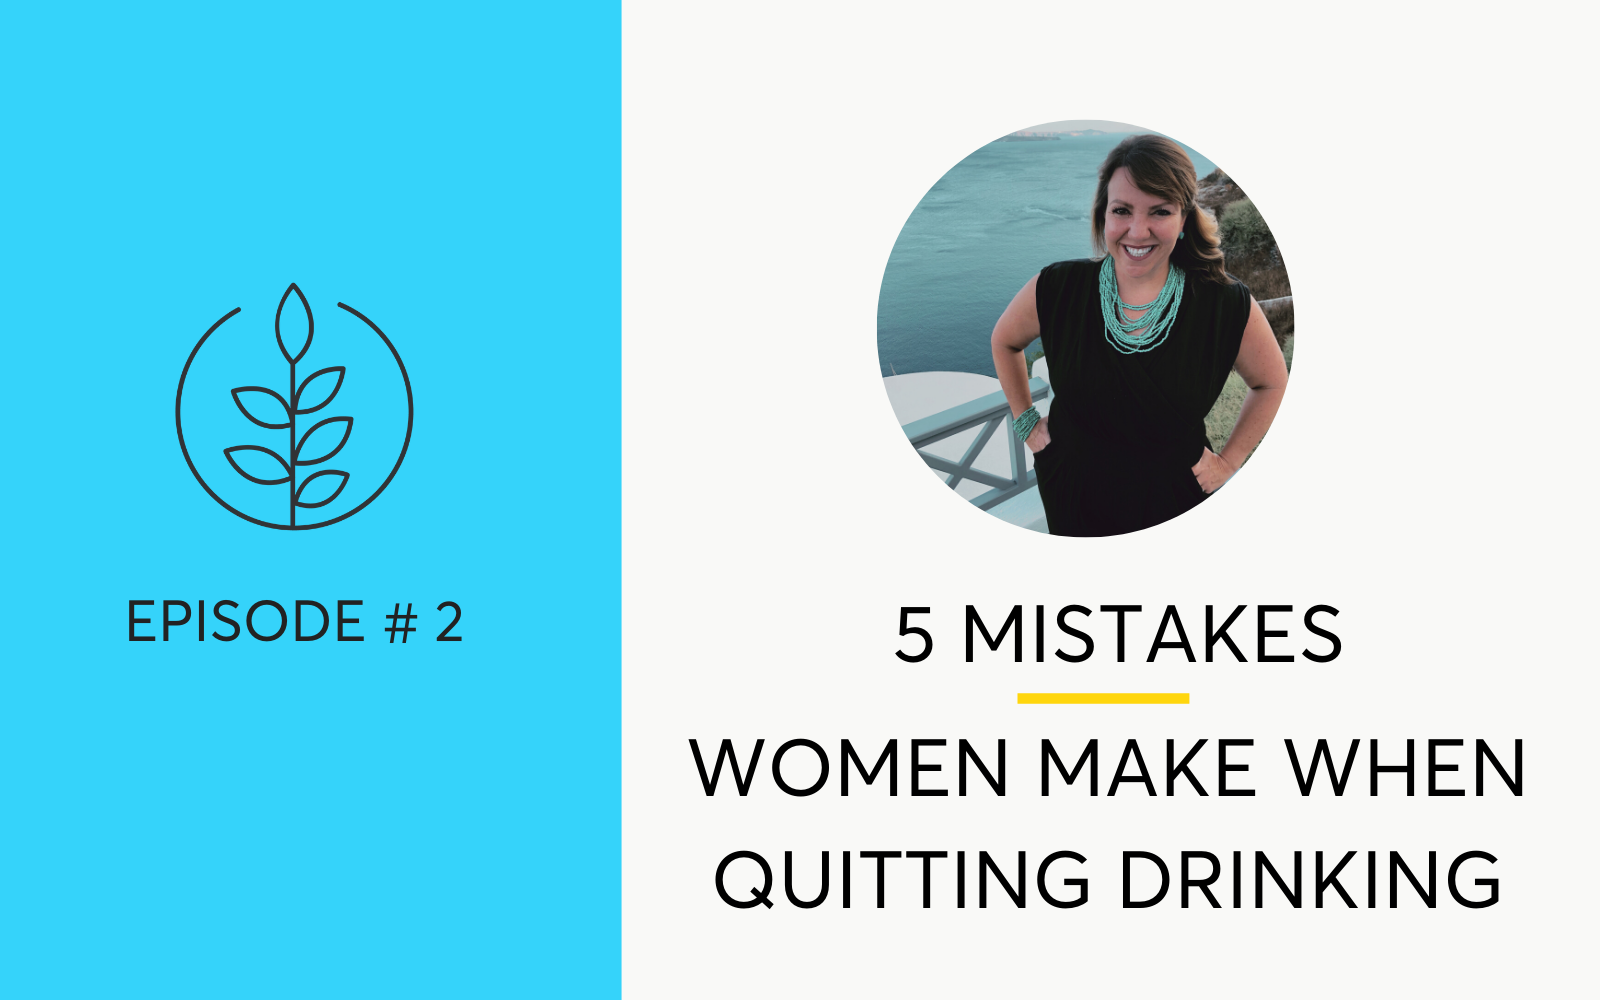 5 Mistakes Women Make When Quitting Drinking